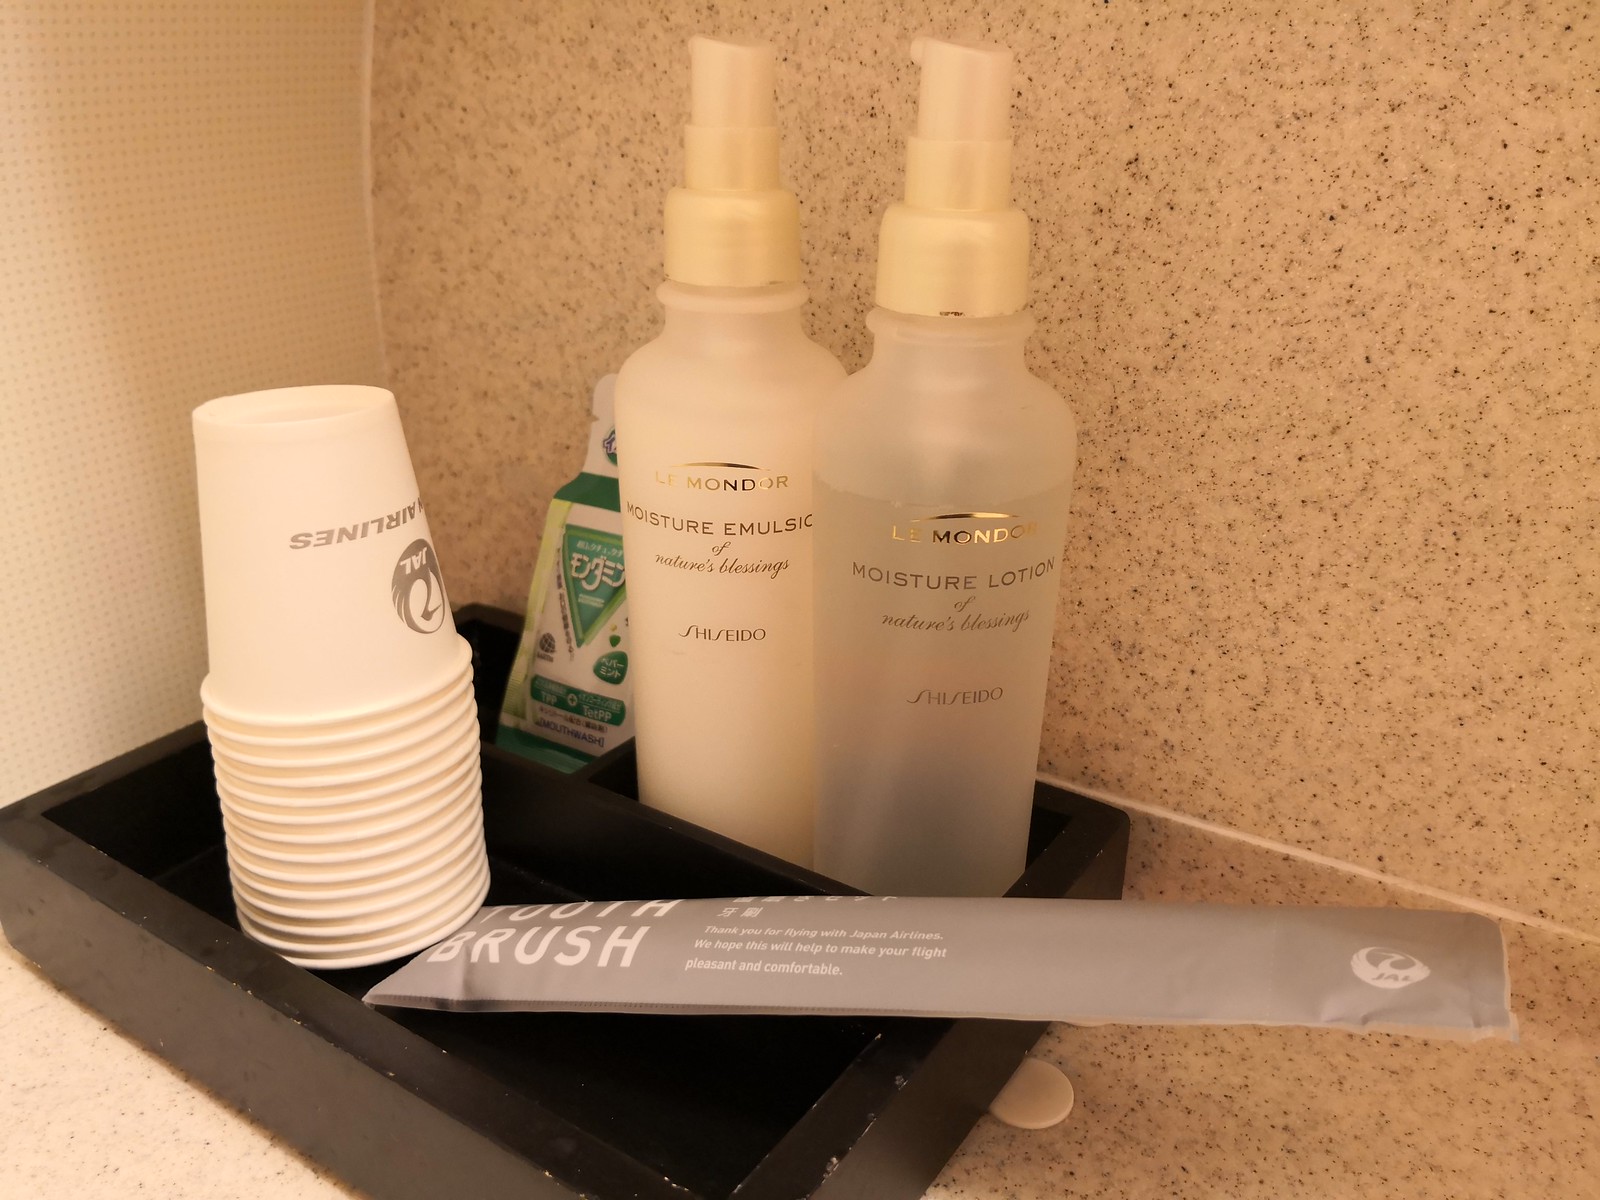 Amenities in the lavatory